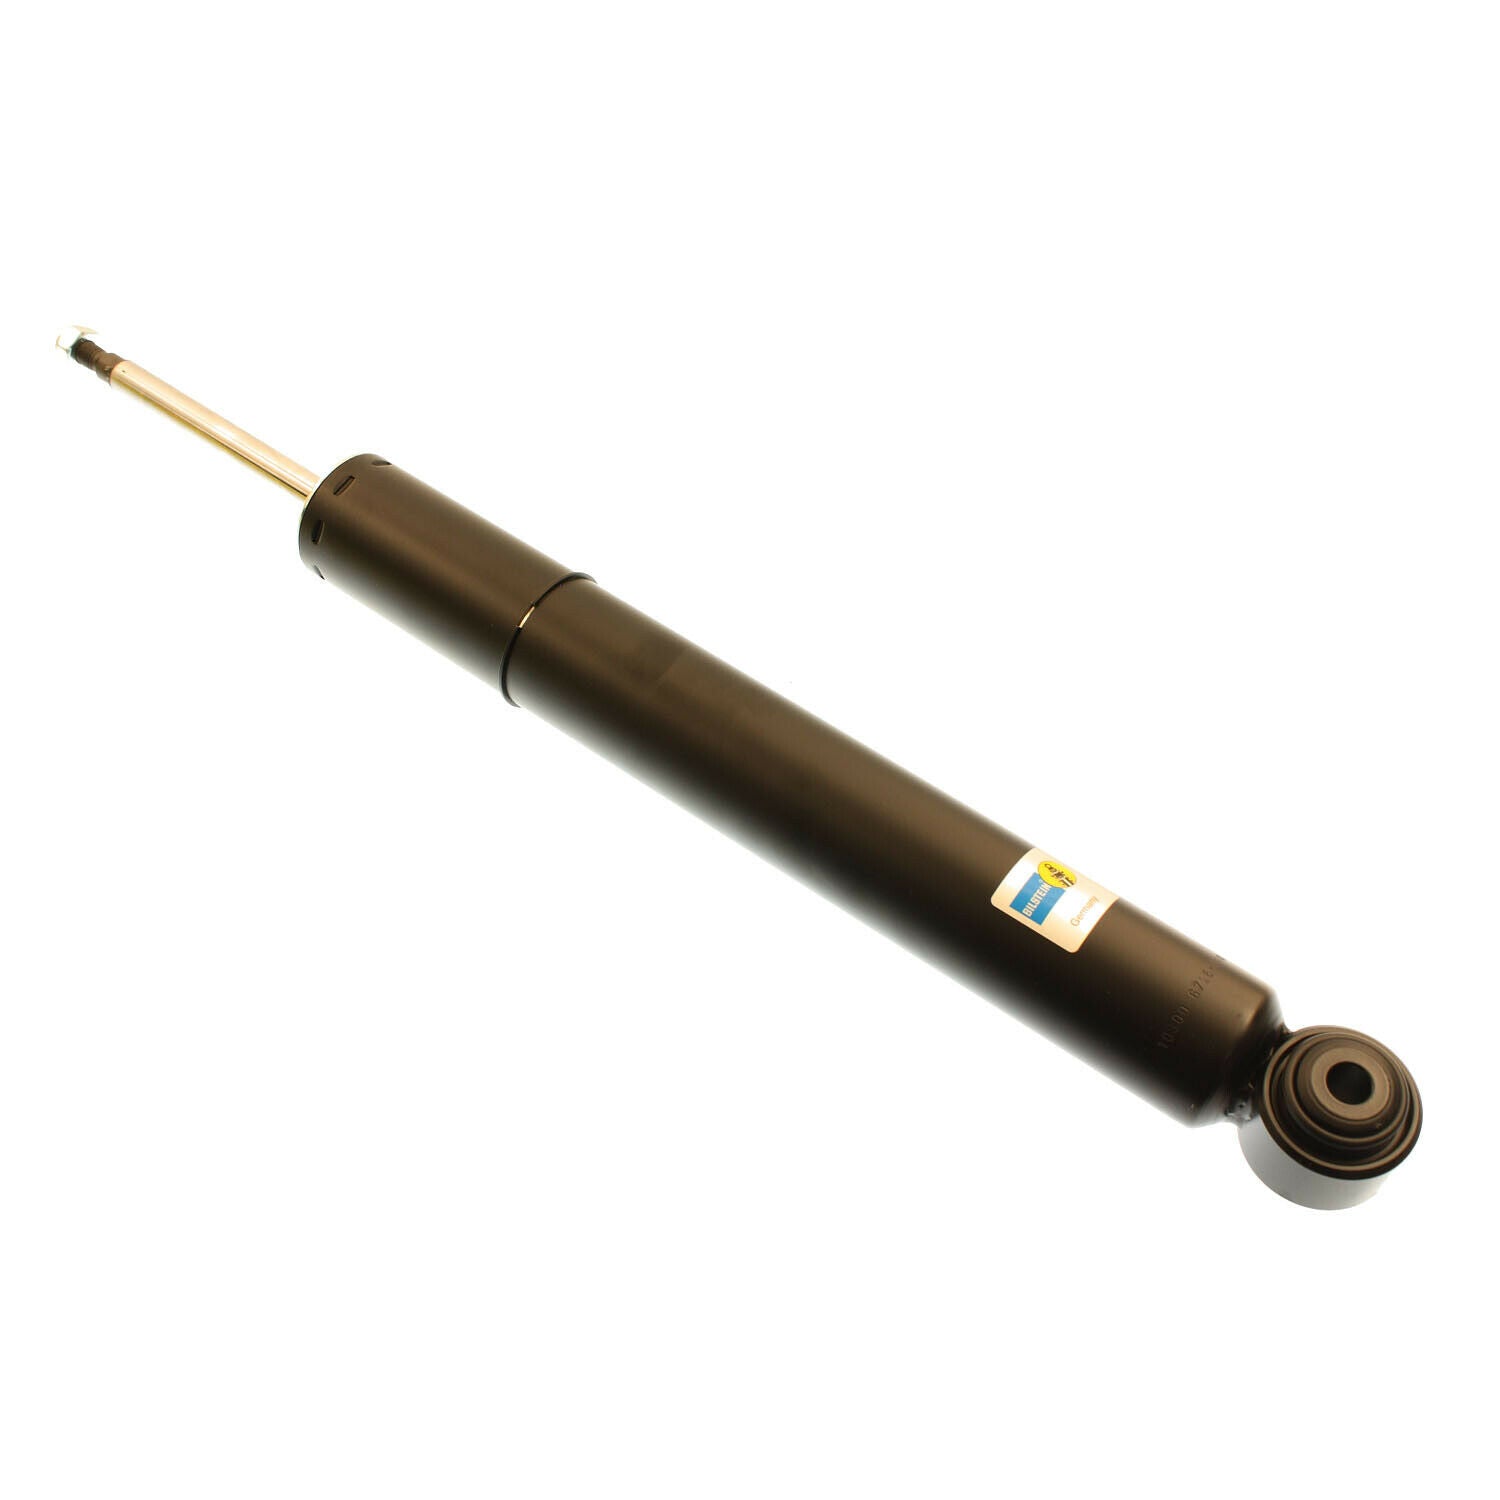 Bilstein OE B4 Replacement Shock Absorber Front for Jaguar XK8/XKR - 24-067263